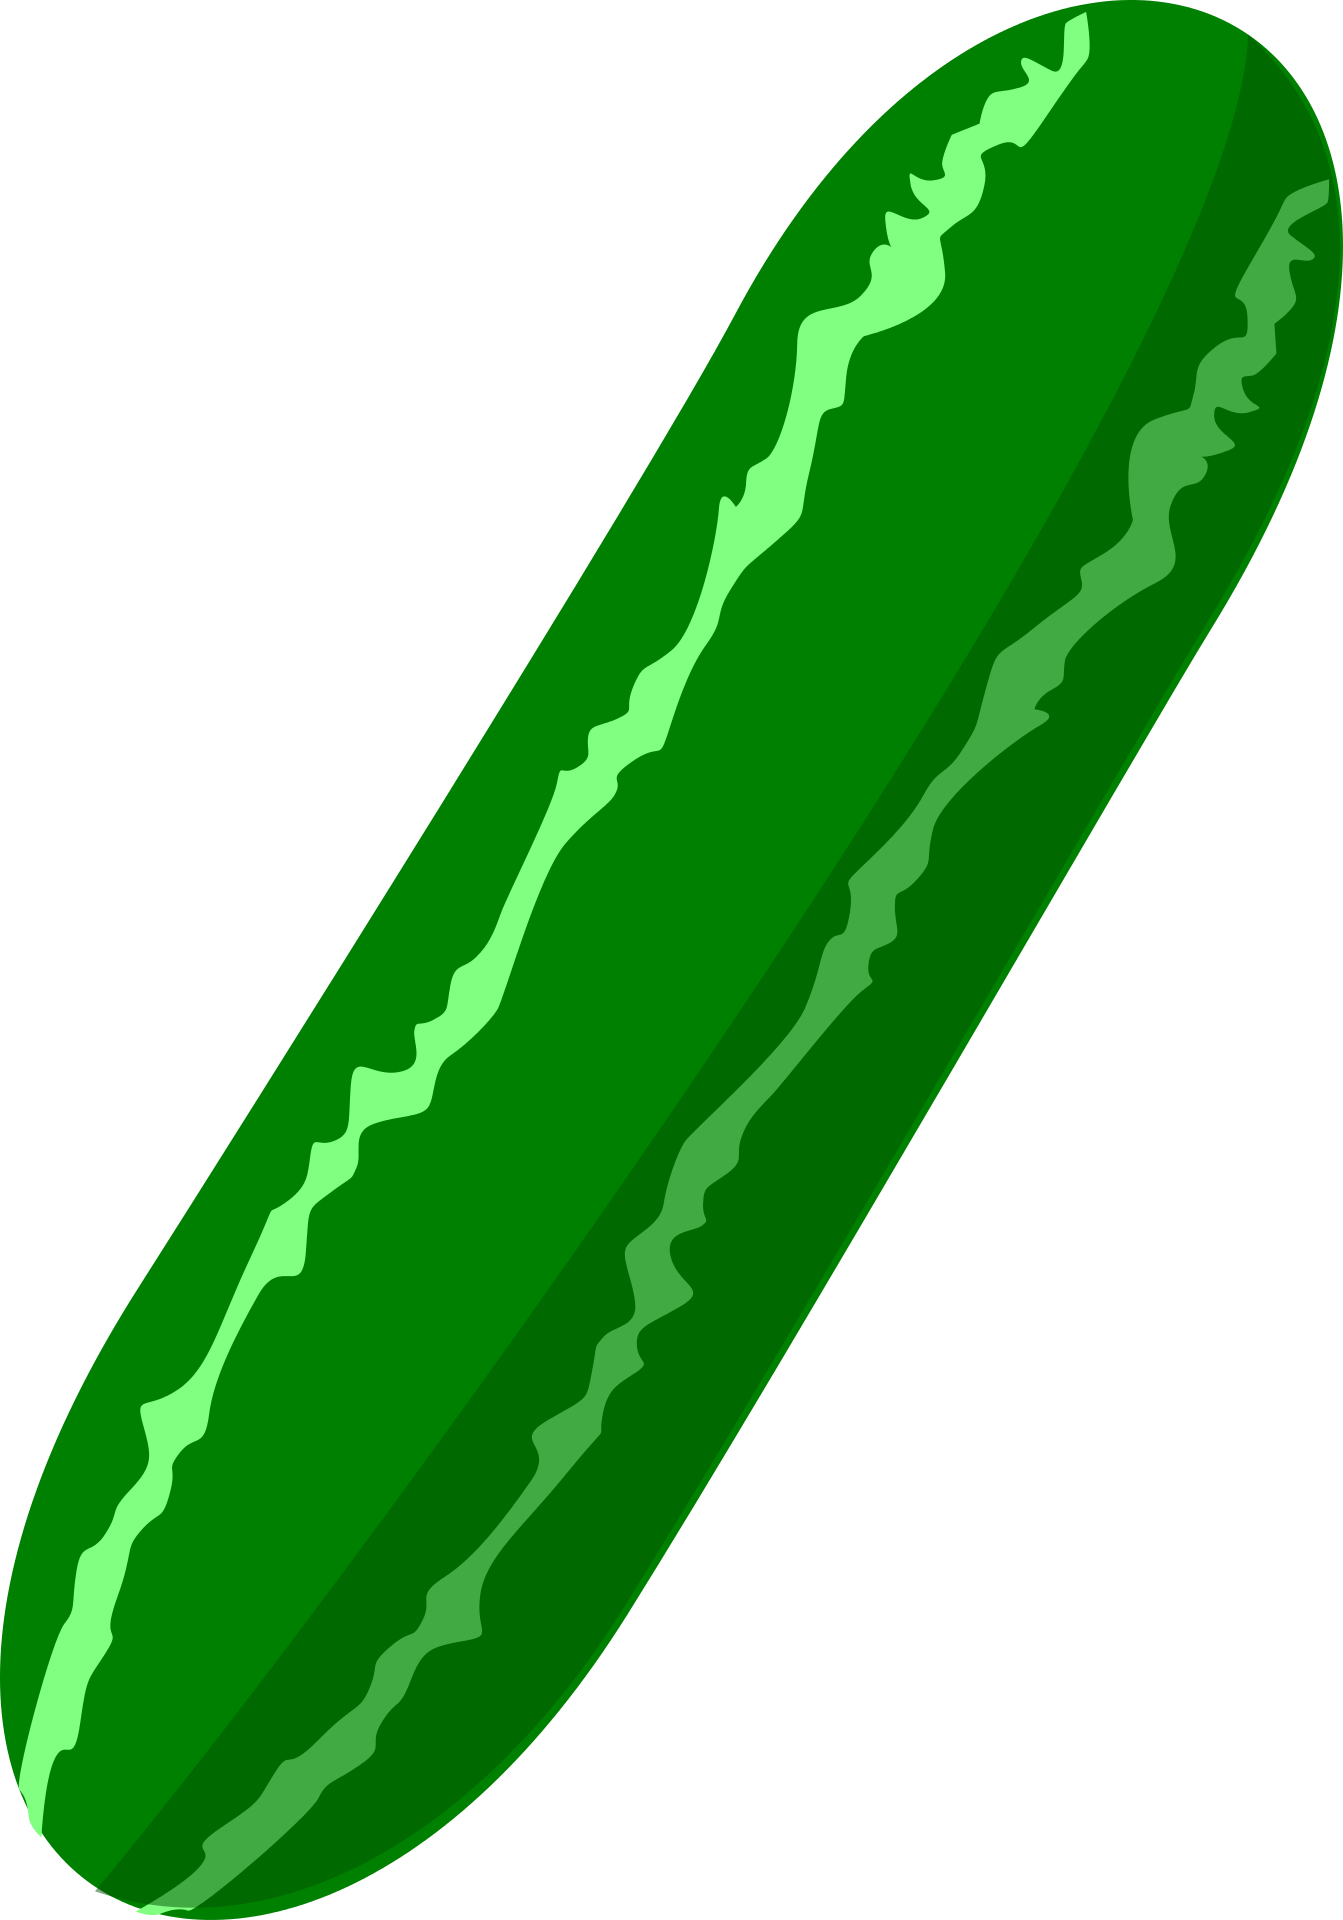 Pickled favicon vegetable clip. Cucumber clipart pickle